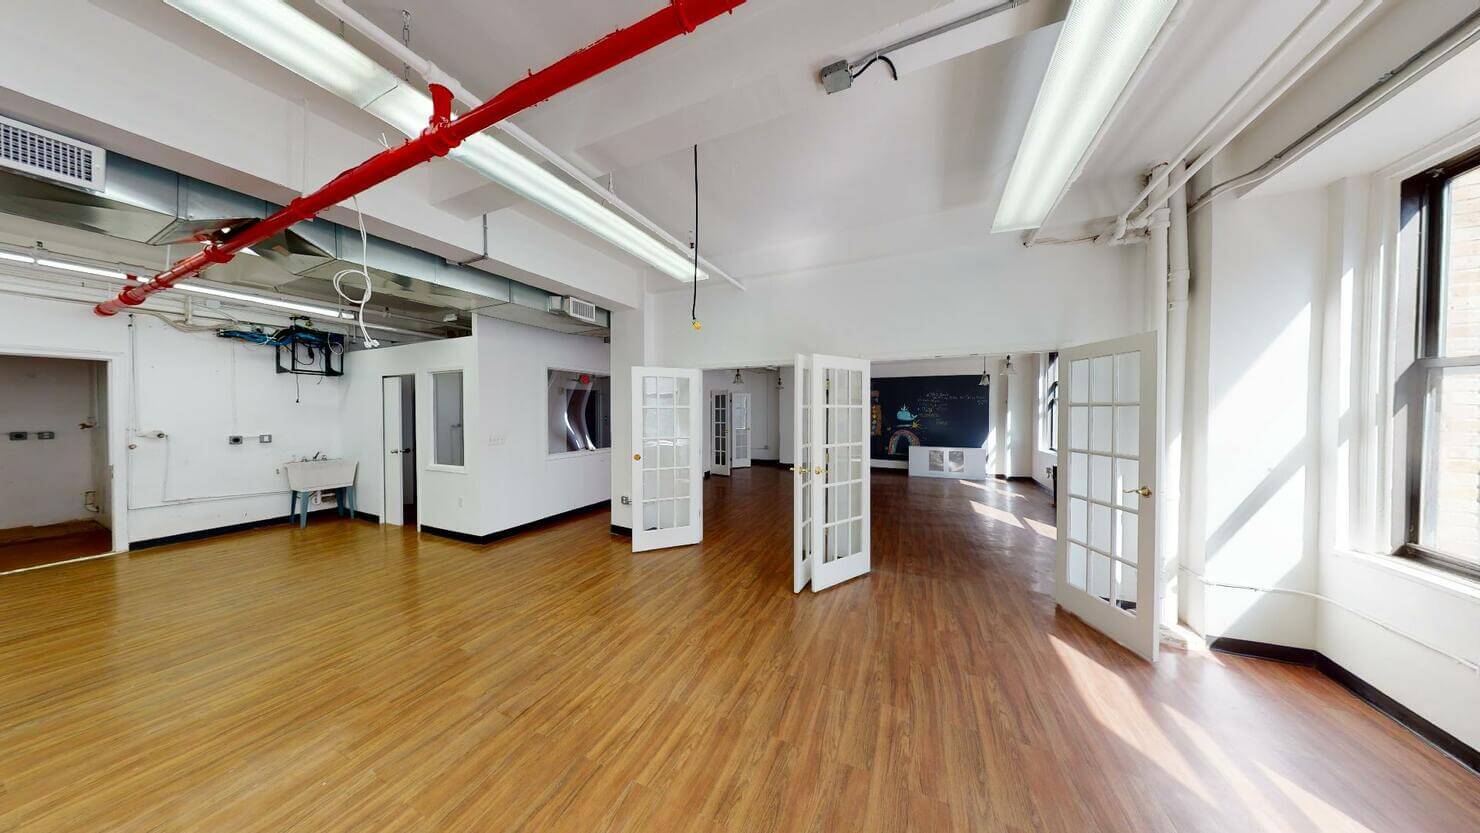 247 West 35th Street Office Space - multiple doors leading to the mid-size room.